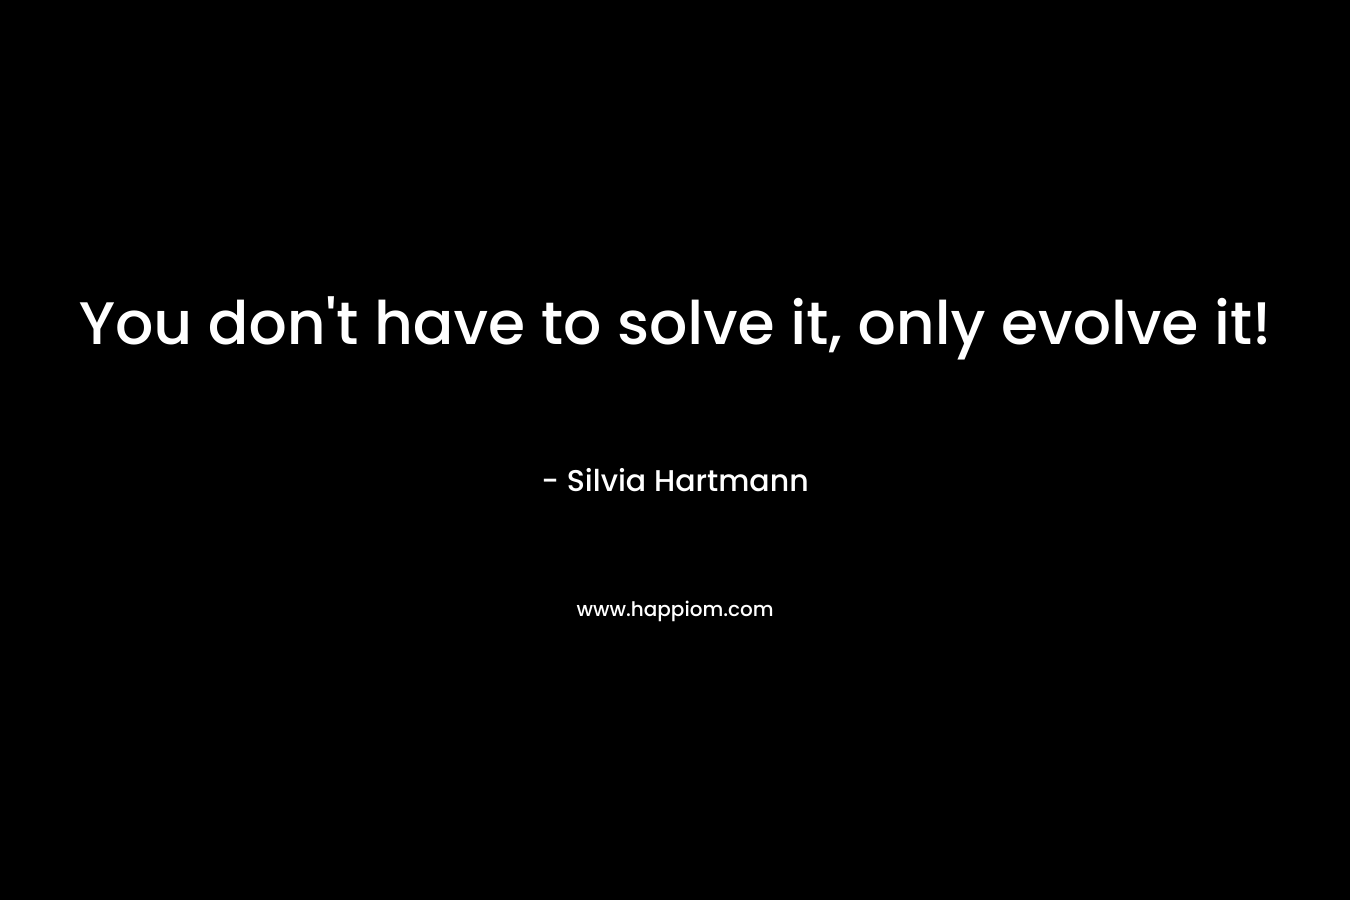 You don’t have to solve it, only evolve it! – Silvia Hartmann